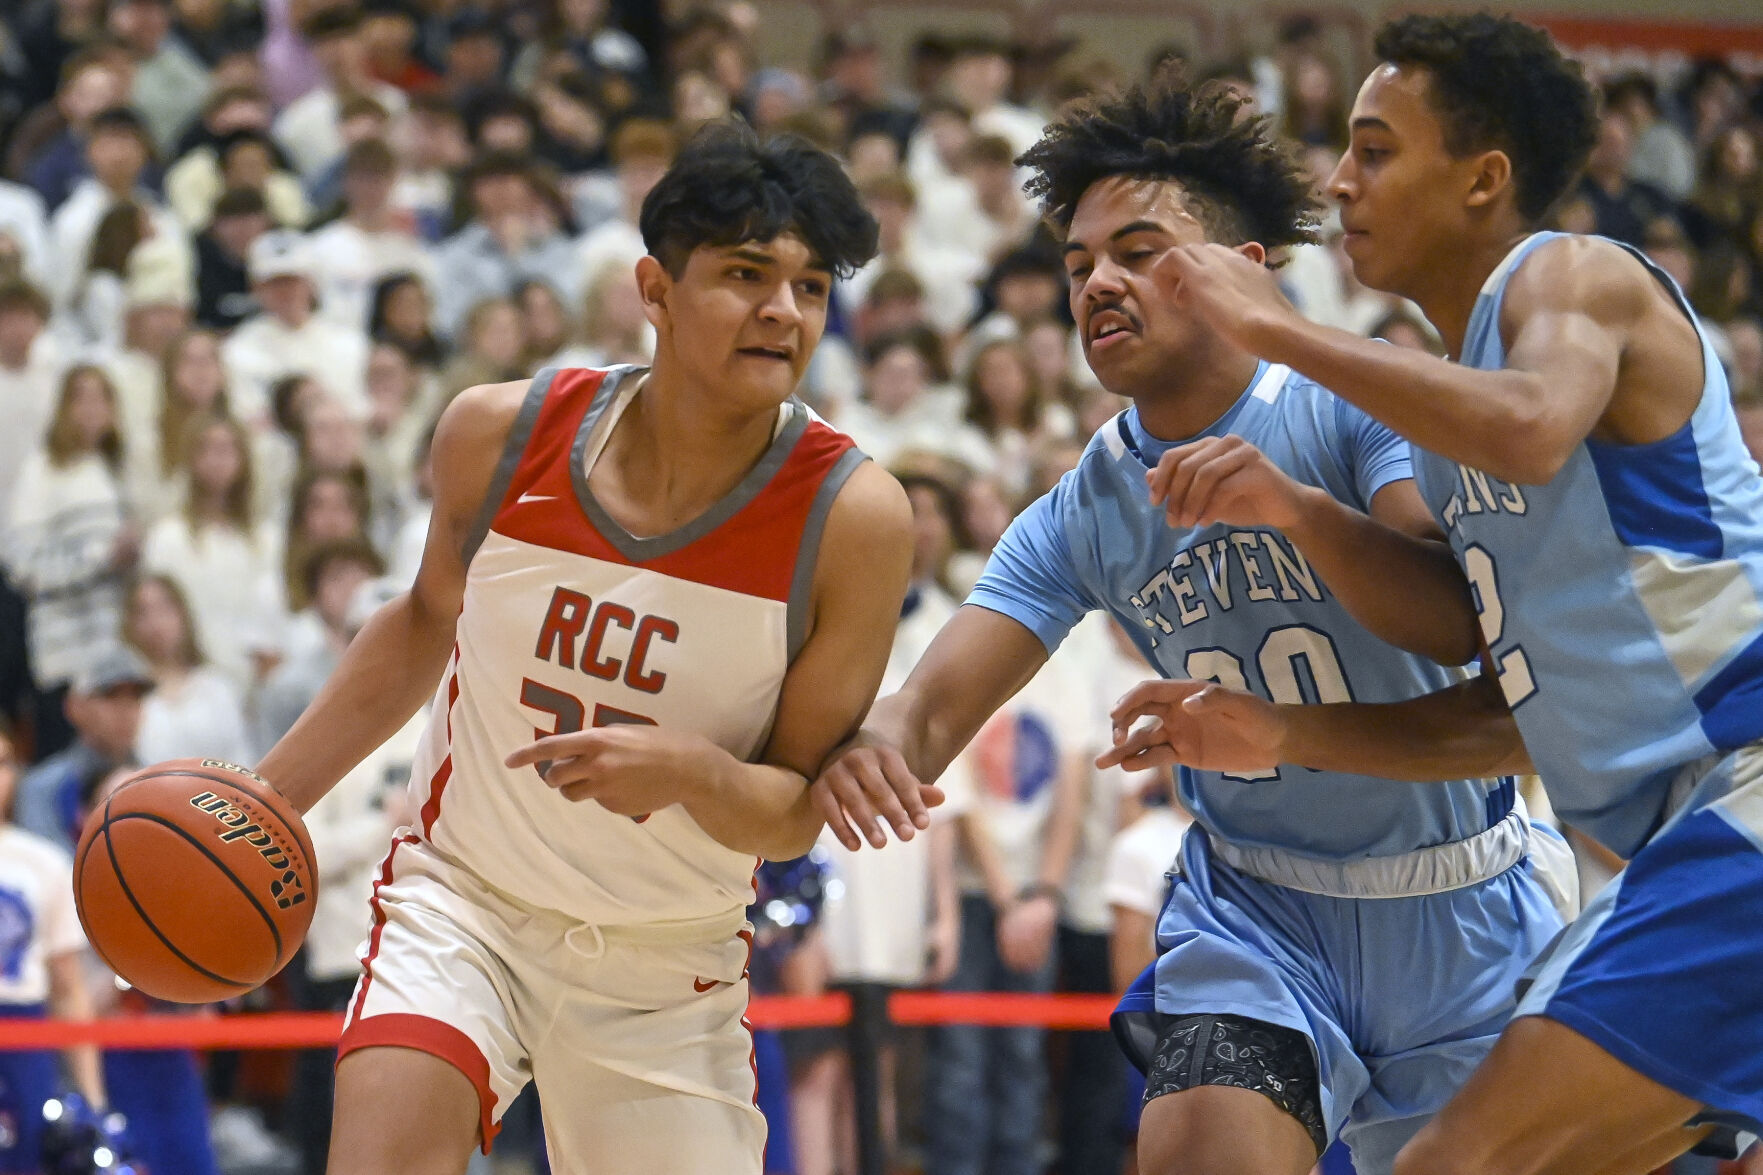 Weekend Roundup: Rapid City Boys Basketball Teams Secure Dramatic Wins